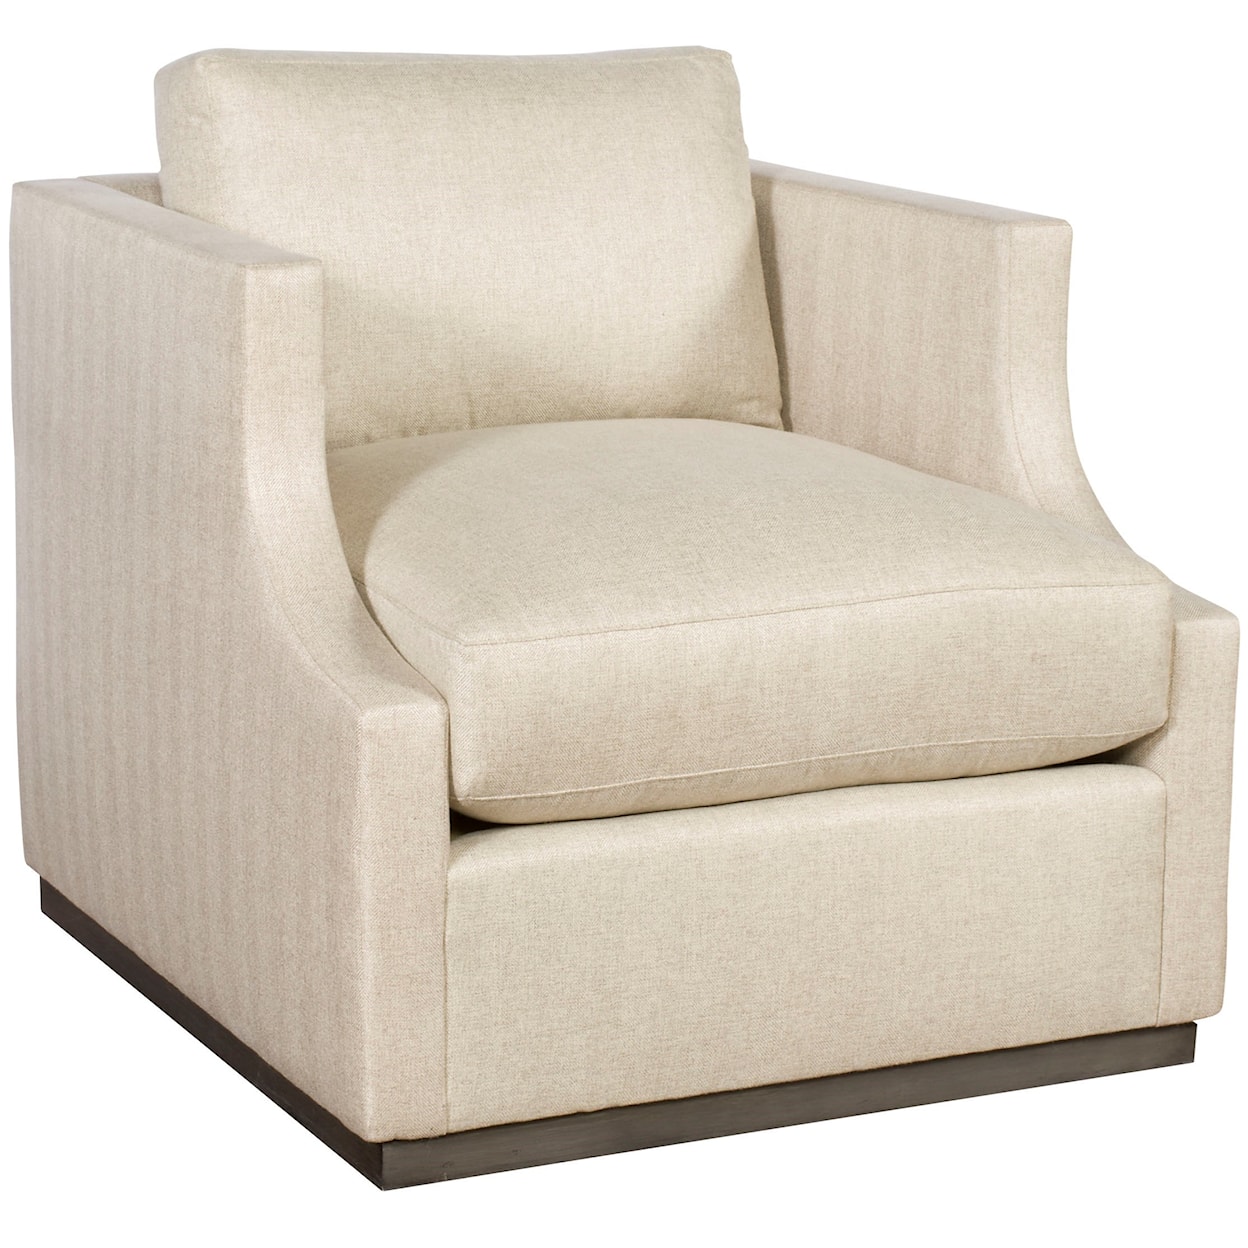 Vanguard Furniture Willowbrook by Thom Filicia Home Swivel Chair